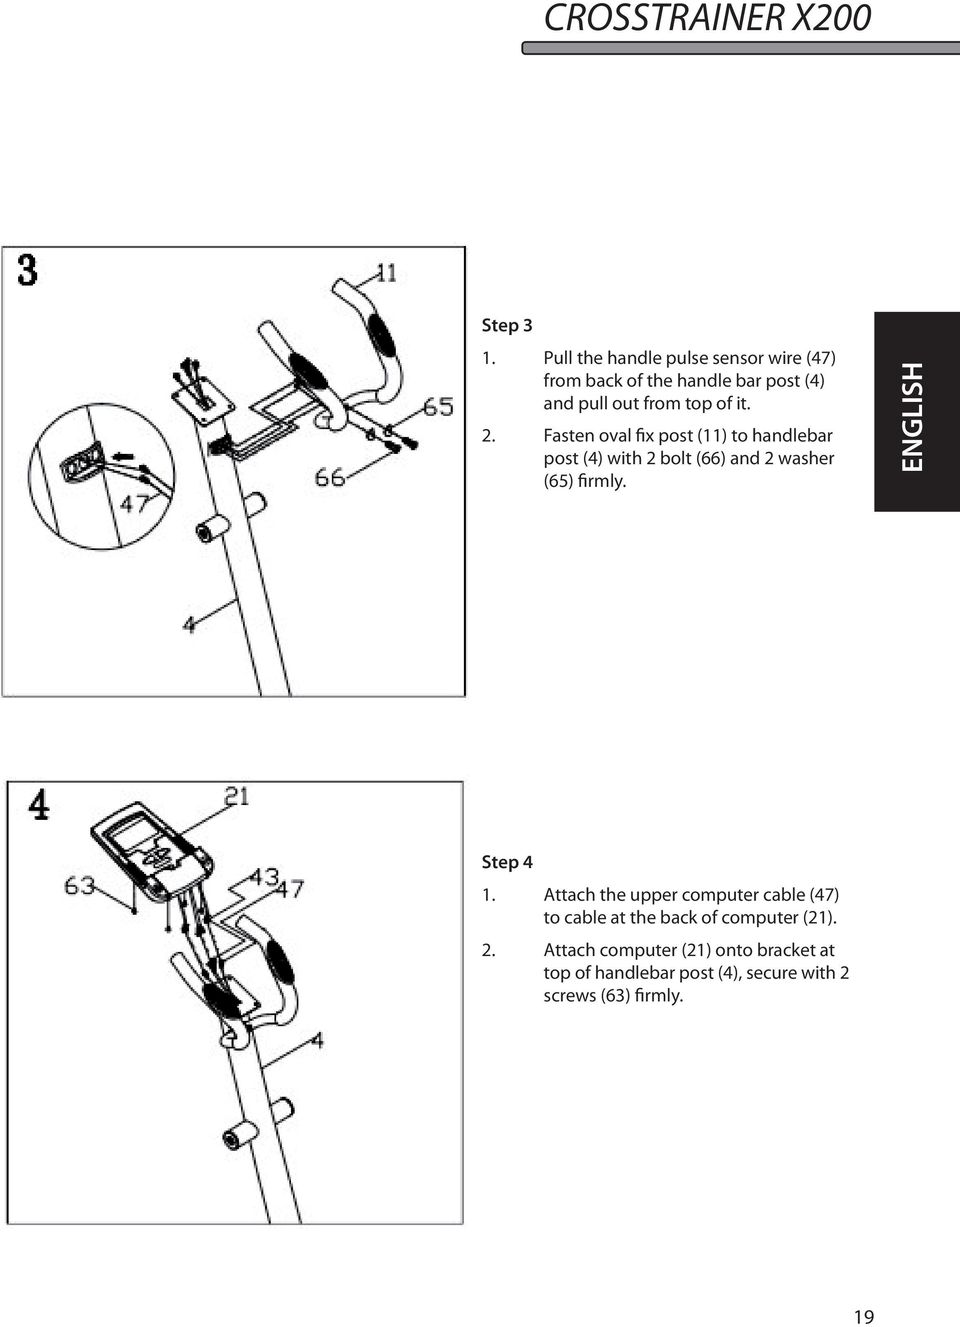 it. 2. Fasten oval fix post (11) to handlebar post (4) with 2 bolt (66) and 2 washer (65) firmly.